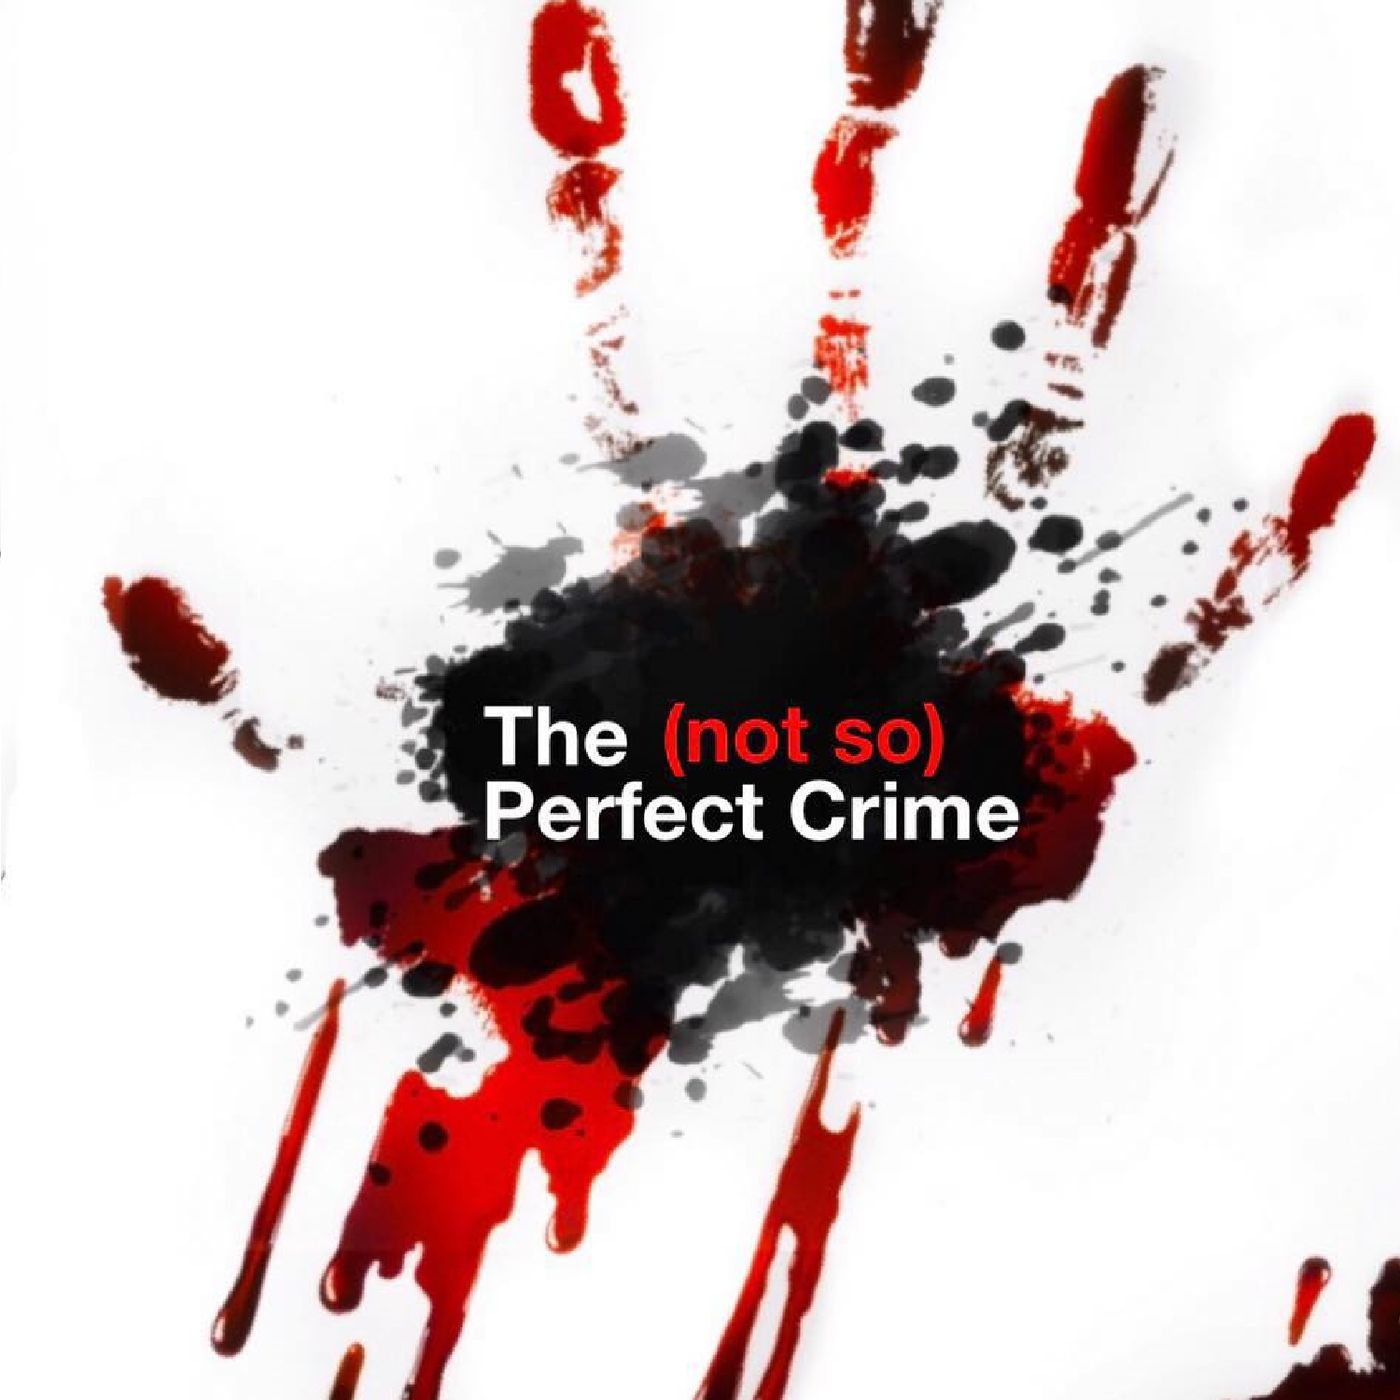 The (not so) Perfect Crime